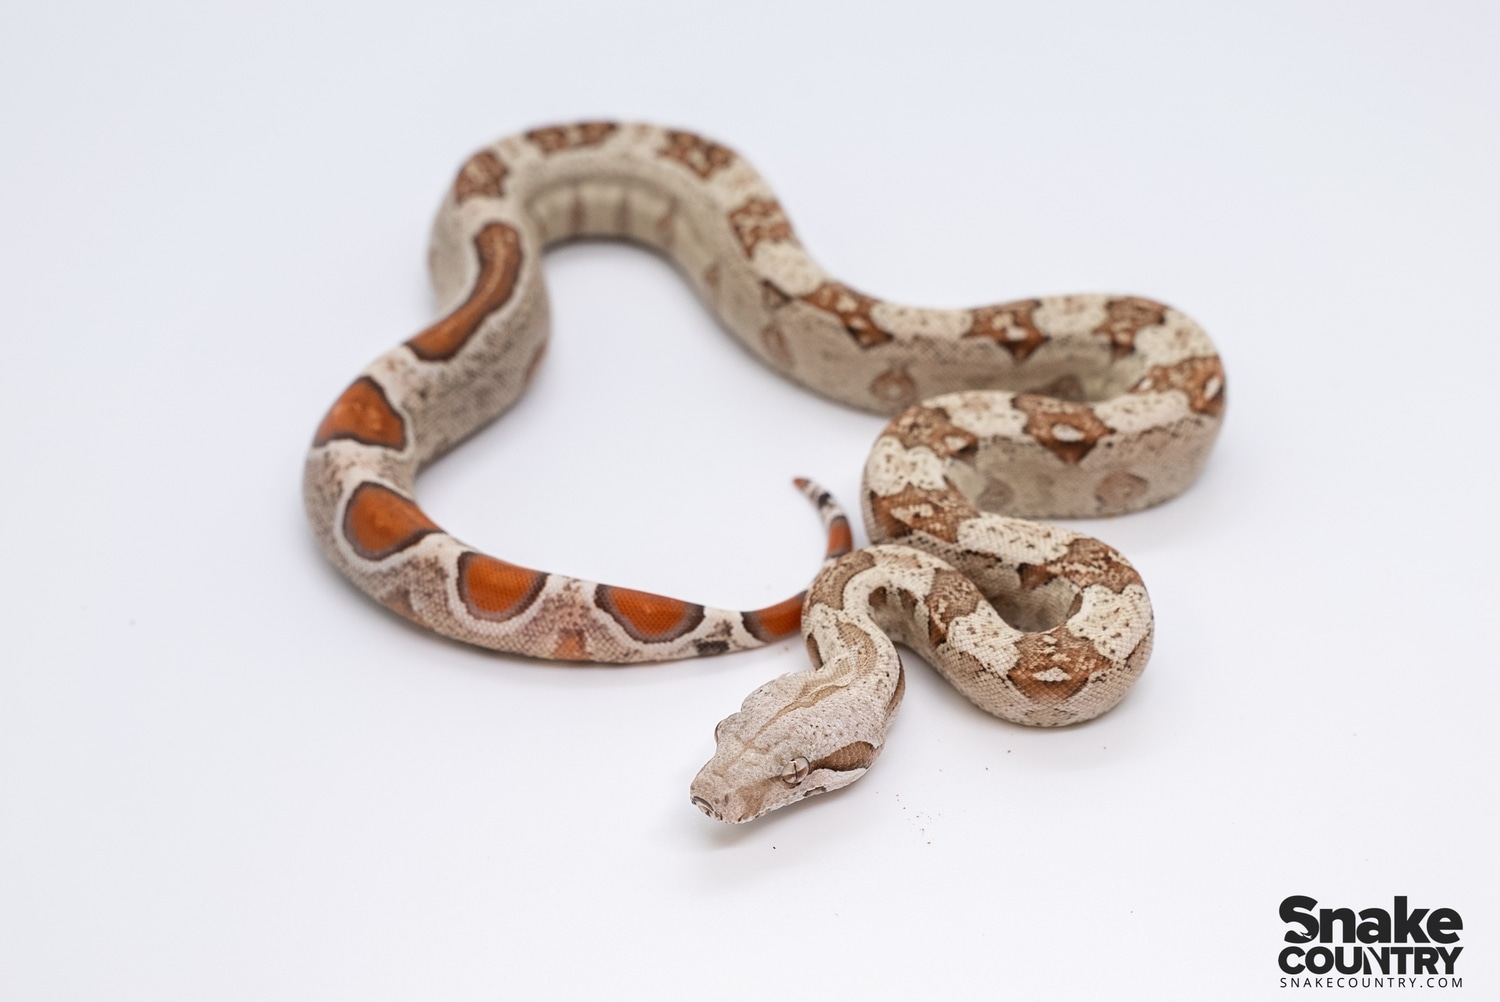 VPI Het Anery Pink Panther Boa Constrictor by Snake Country